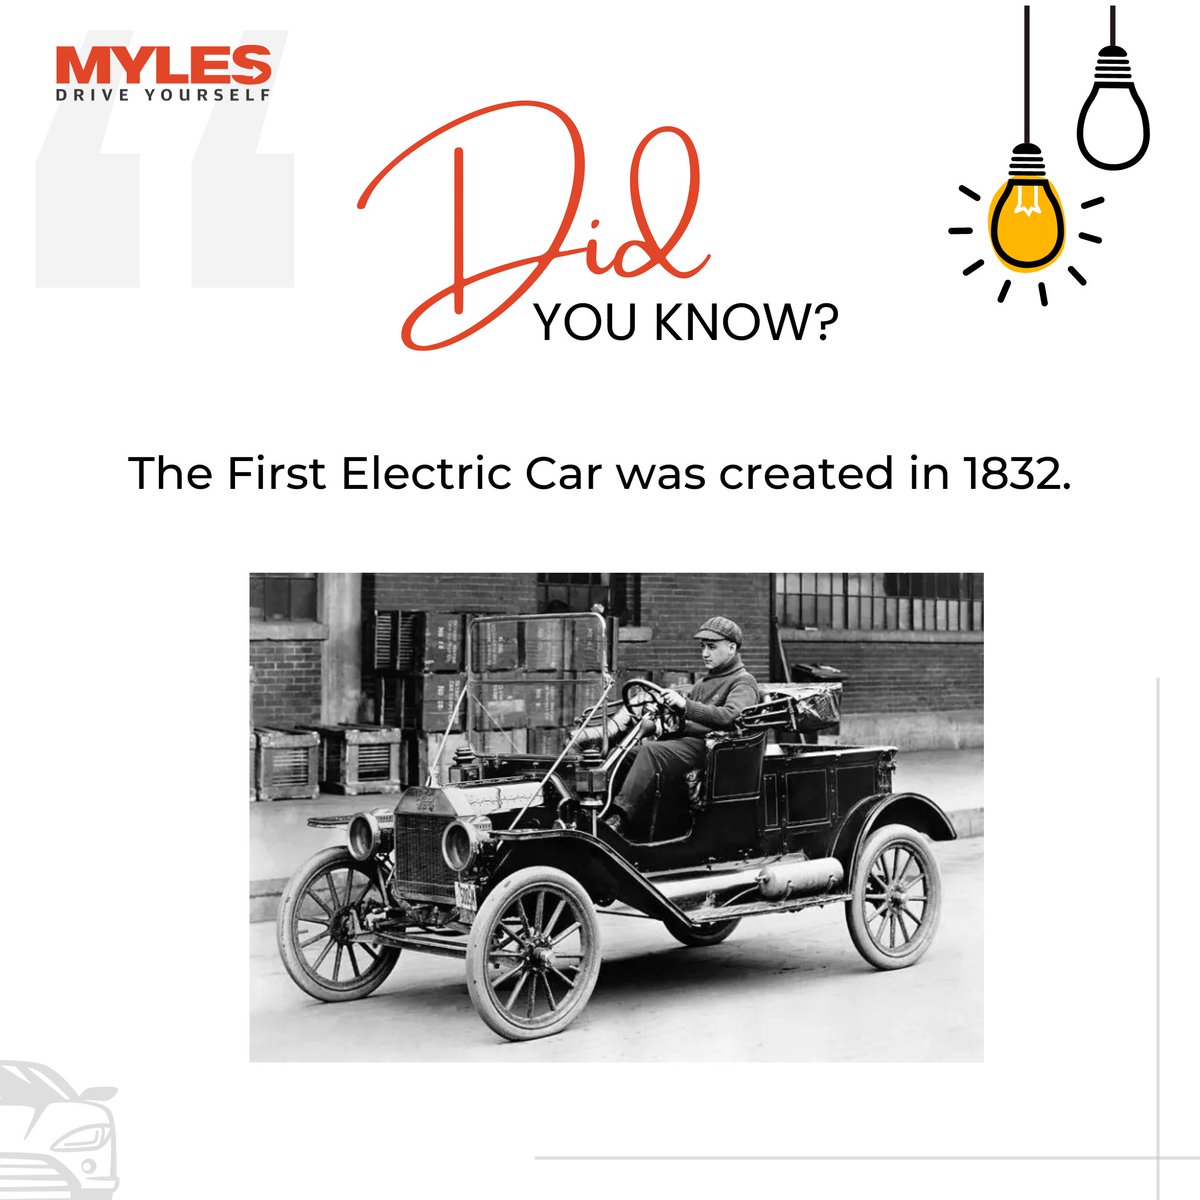 The first Electric Car was created in 1832👈🚗
Follow @MylesCars 
Visit> mylescars.com
#funfact #factsaboutcars
#mylescars #picoftheday #trending #trendingnow #didyouknow #didyouknowfacts #cars #carsoninstagram #supercars #carsubscription #smartsubscription #electriccar